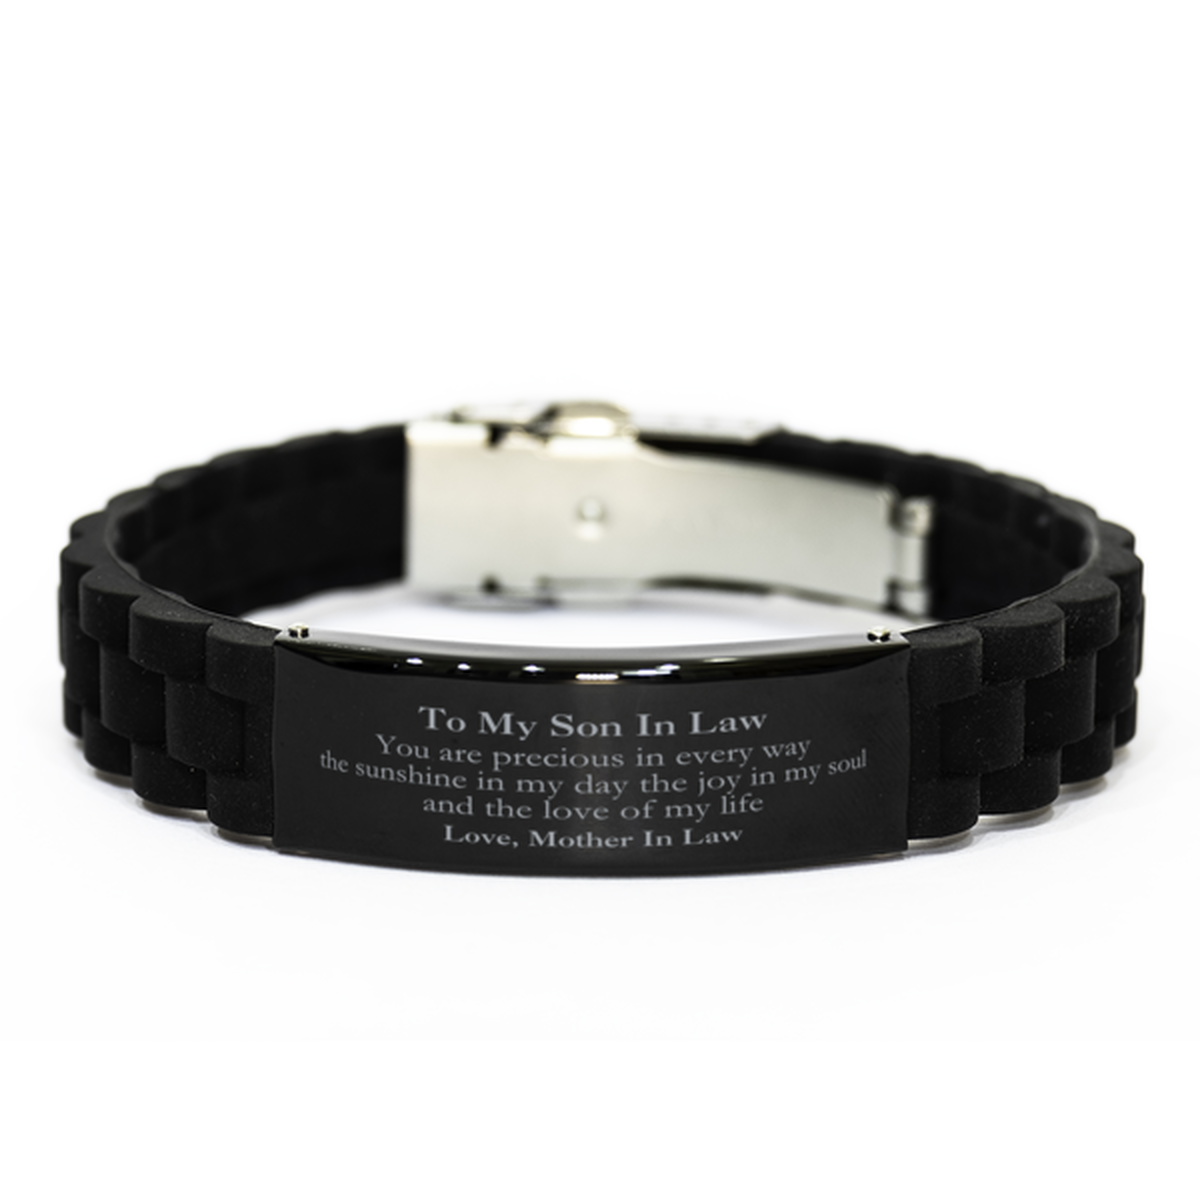 Graduation Gifts for Son In Law Black Glidelock Clasp Bracelet Present from Mother In Law, Christmas Son In Law Birthday Gifts Son In Law You are precious in every way the sunshine in my day. Love, Mother In Law